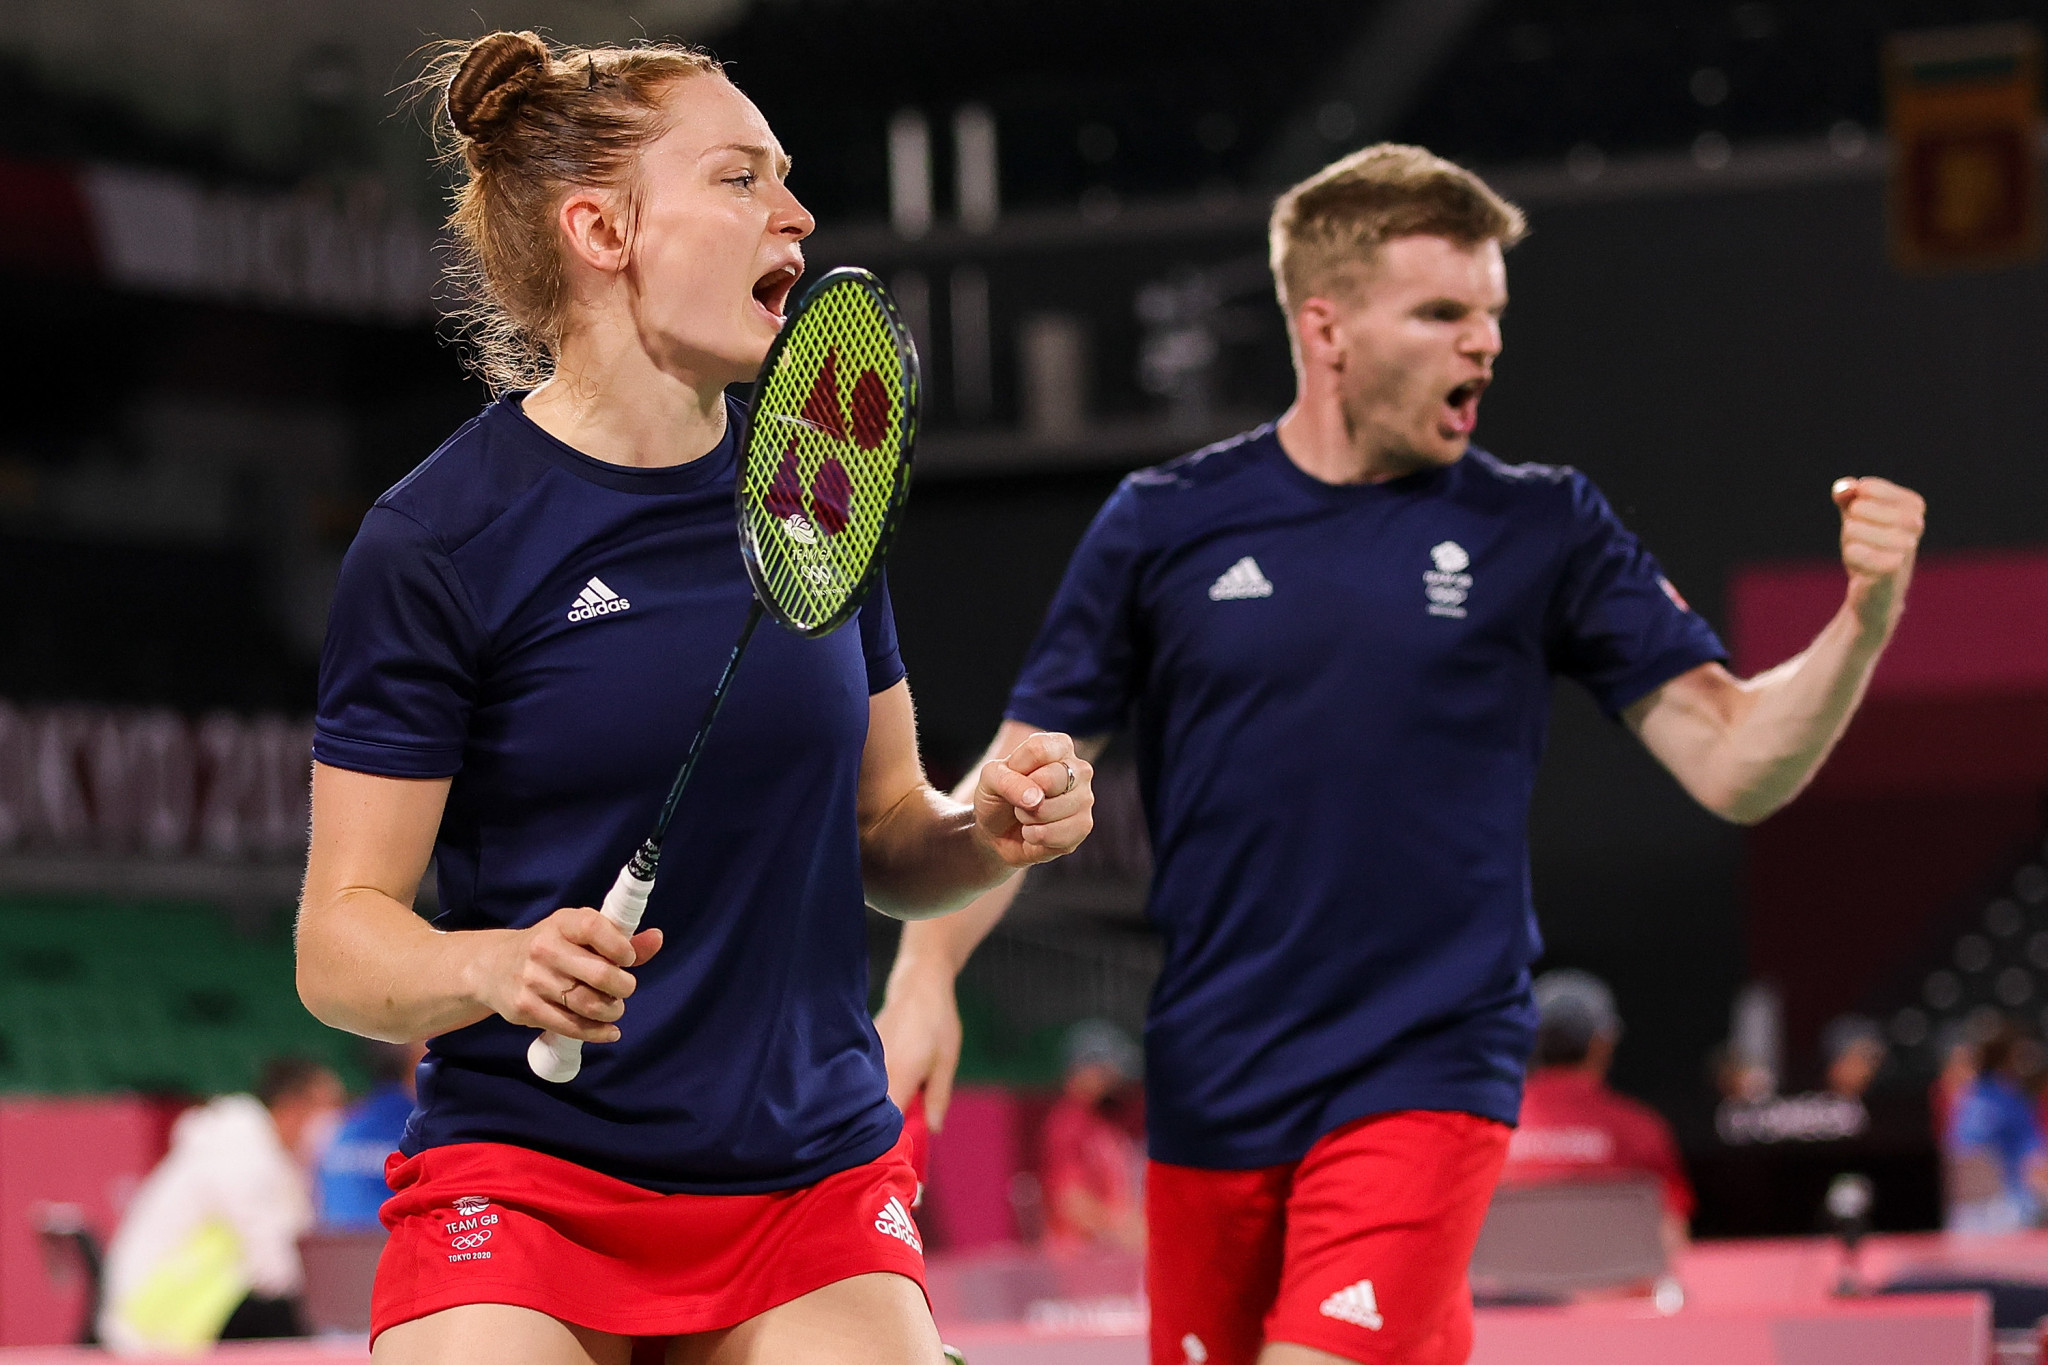 Lauren Smith and Marcus Ellis are part of England's 10 player strong badminton team for Birmingham 2022 ©Getty Images